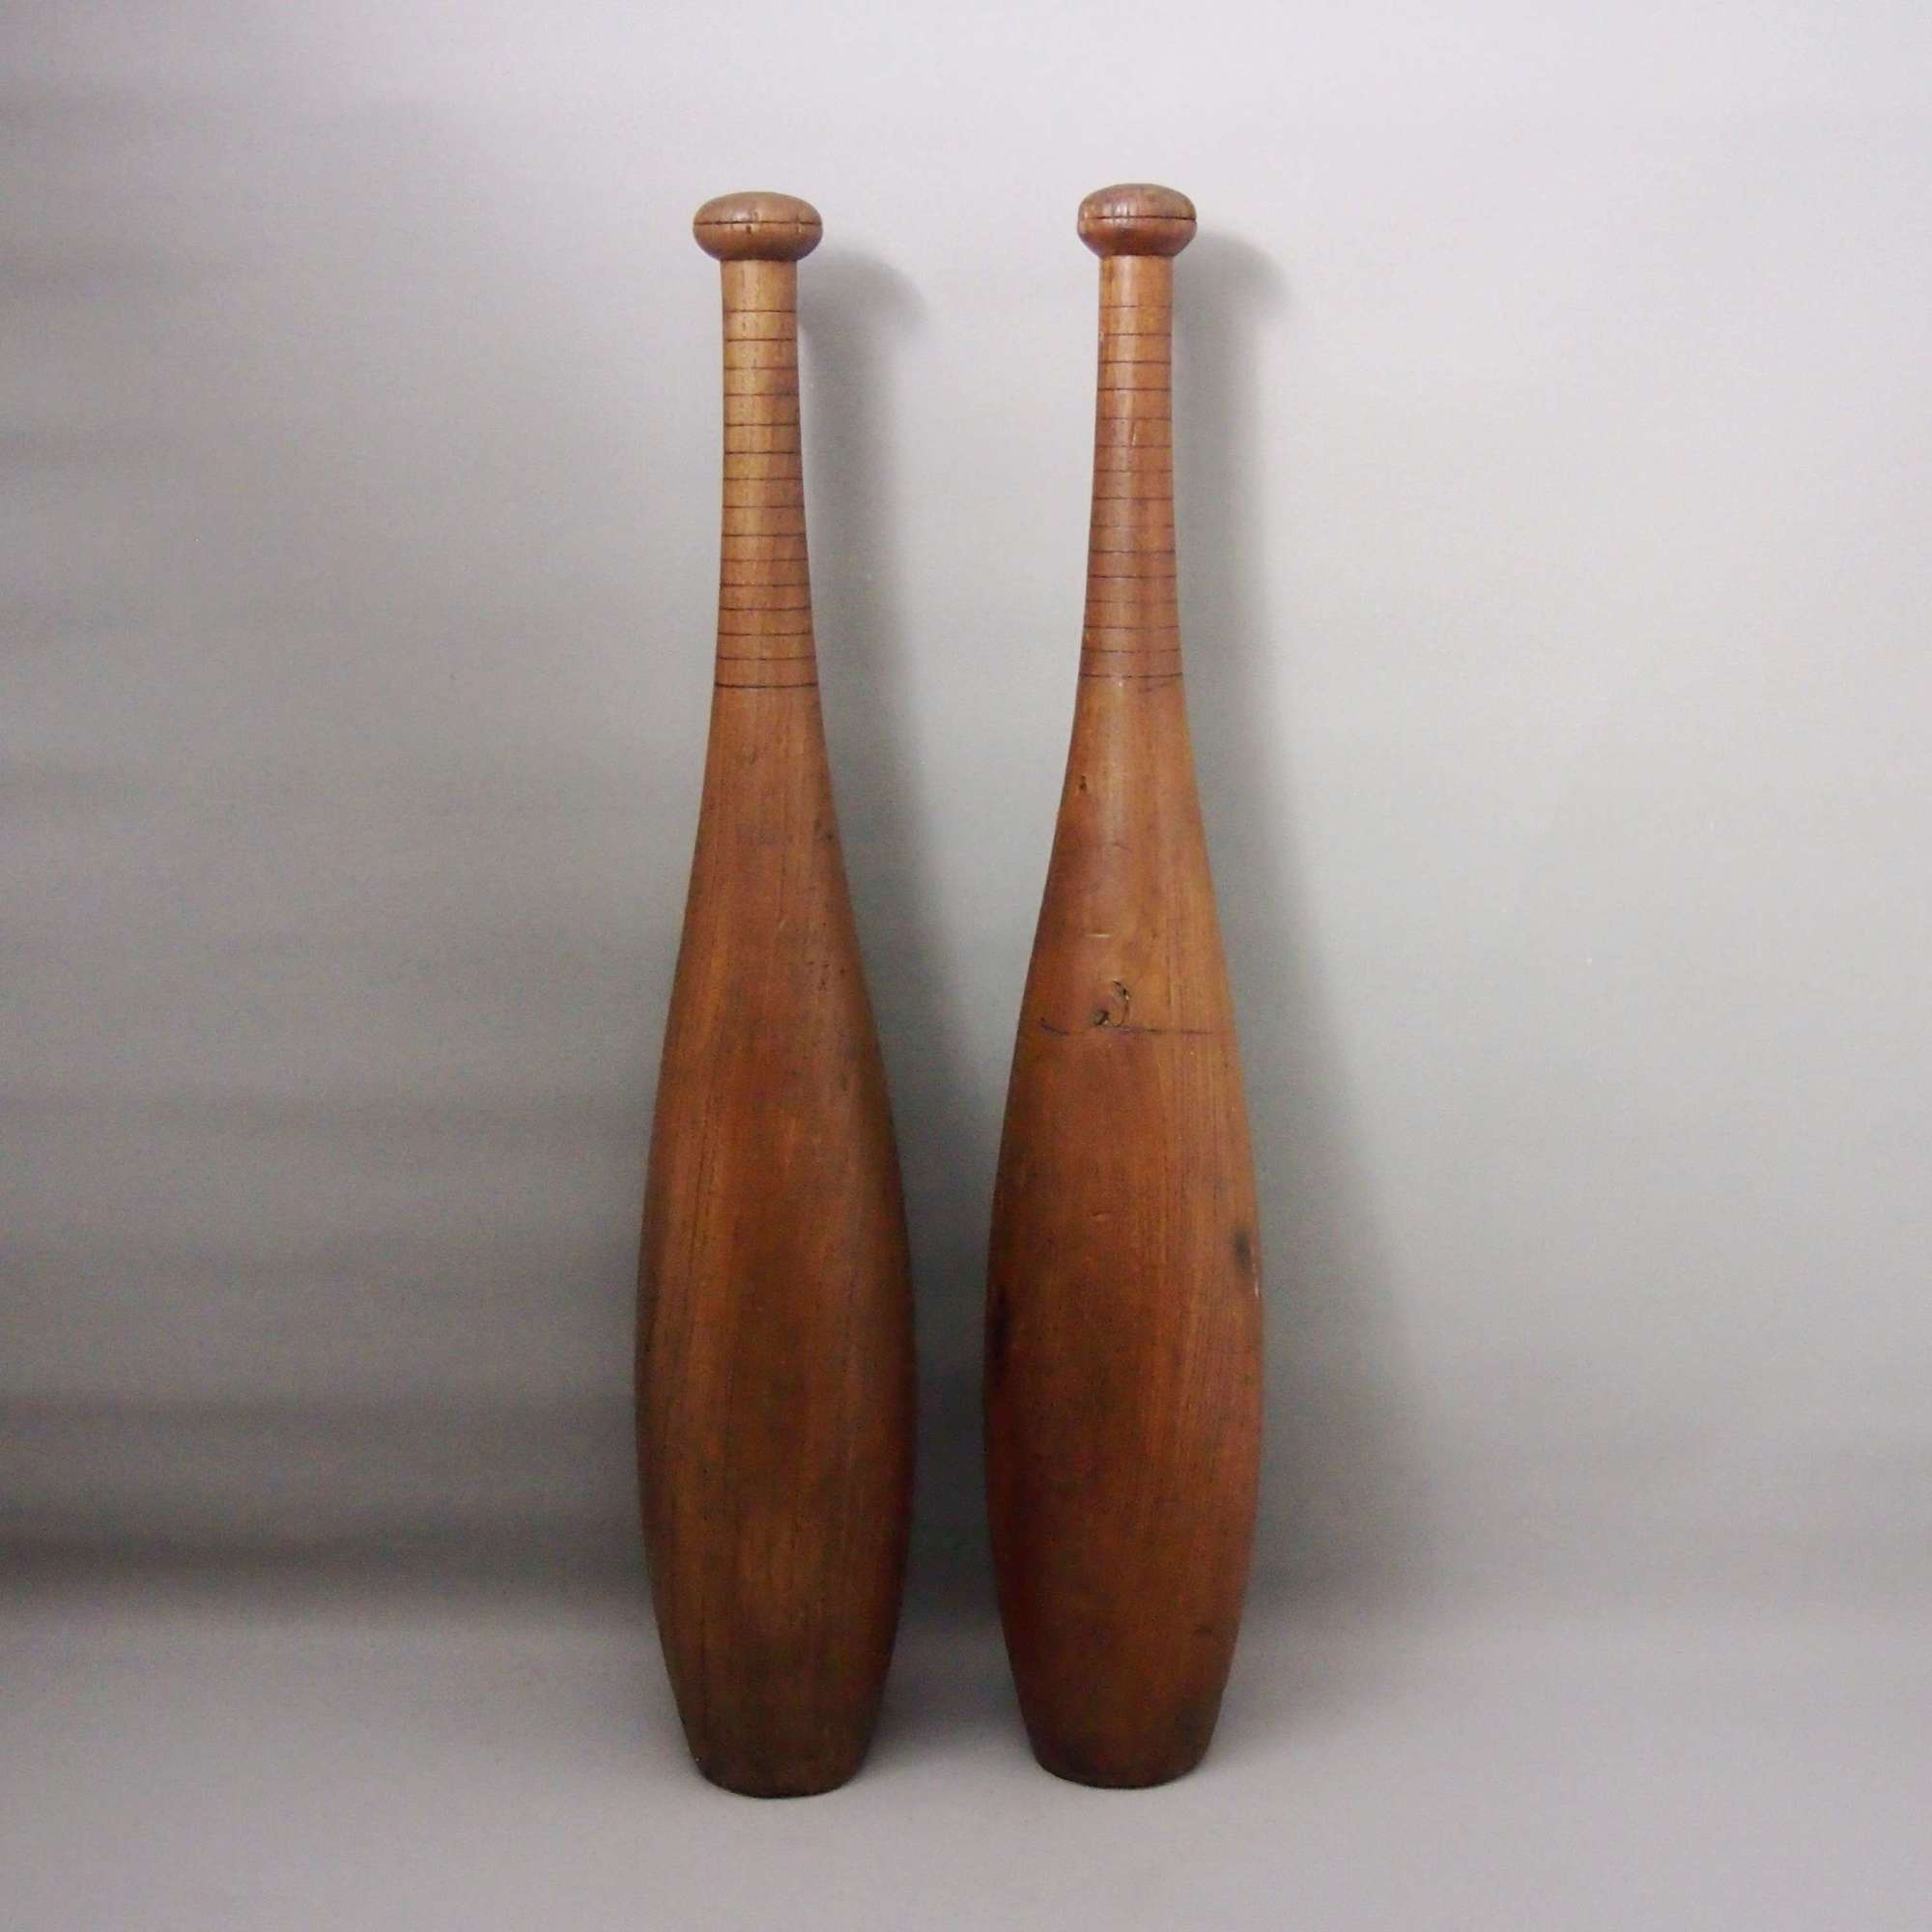 Pair of Vintage Large Wood Exercise Pins or Indian Clubs, W8658